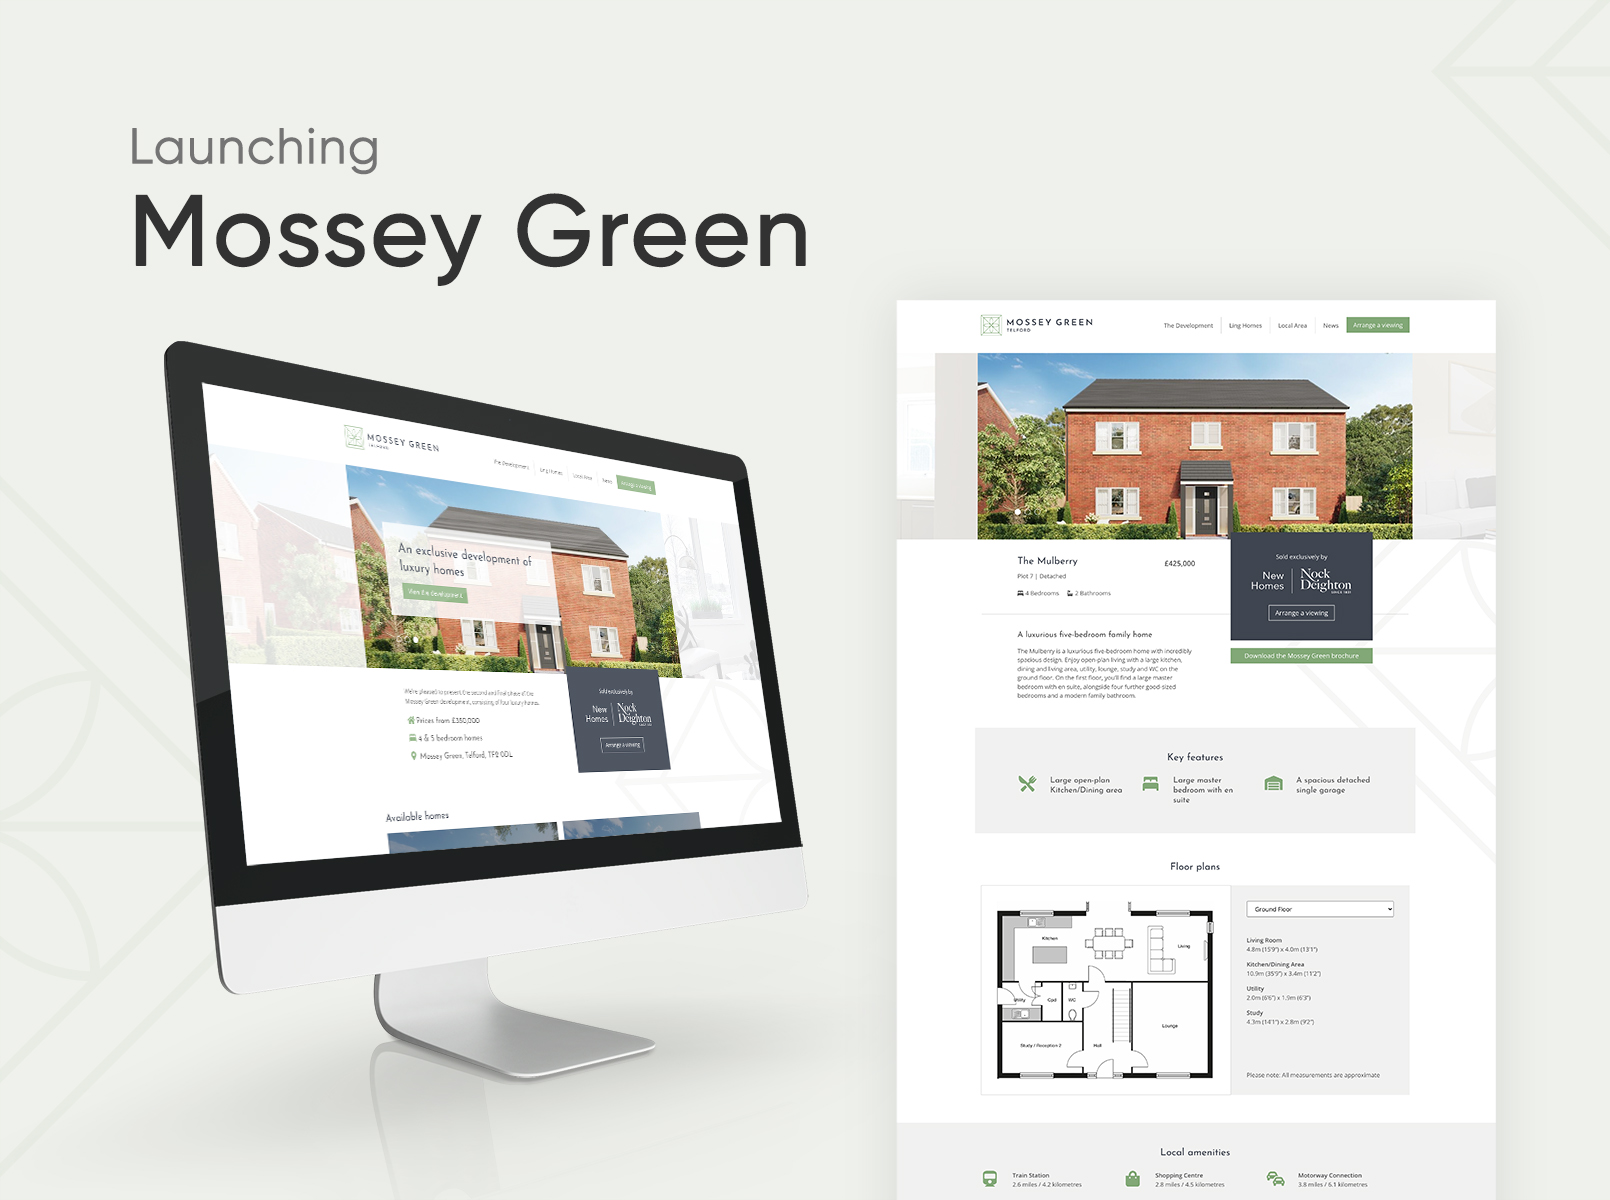 Launching Mossey Green for Ling Homes